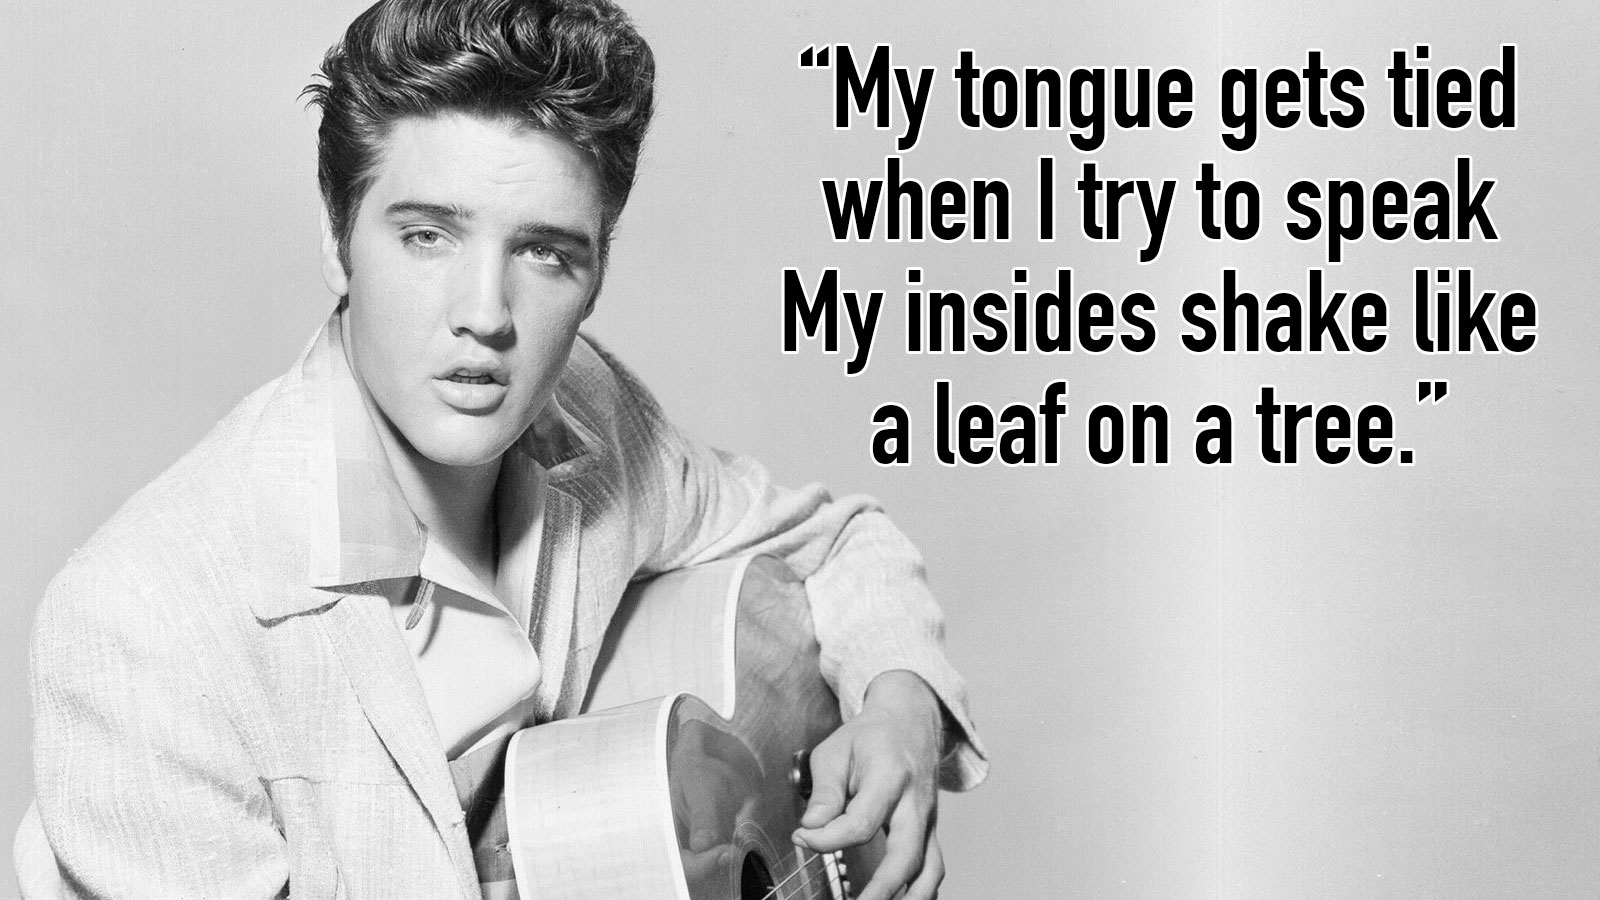 Can You Guess Which Elvis Presley Song This Lyric Is From? 81